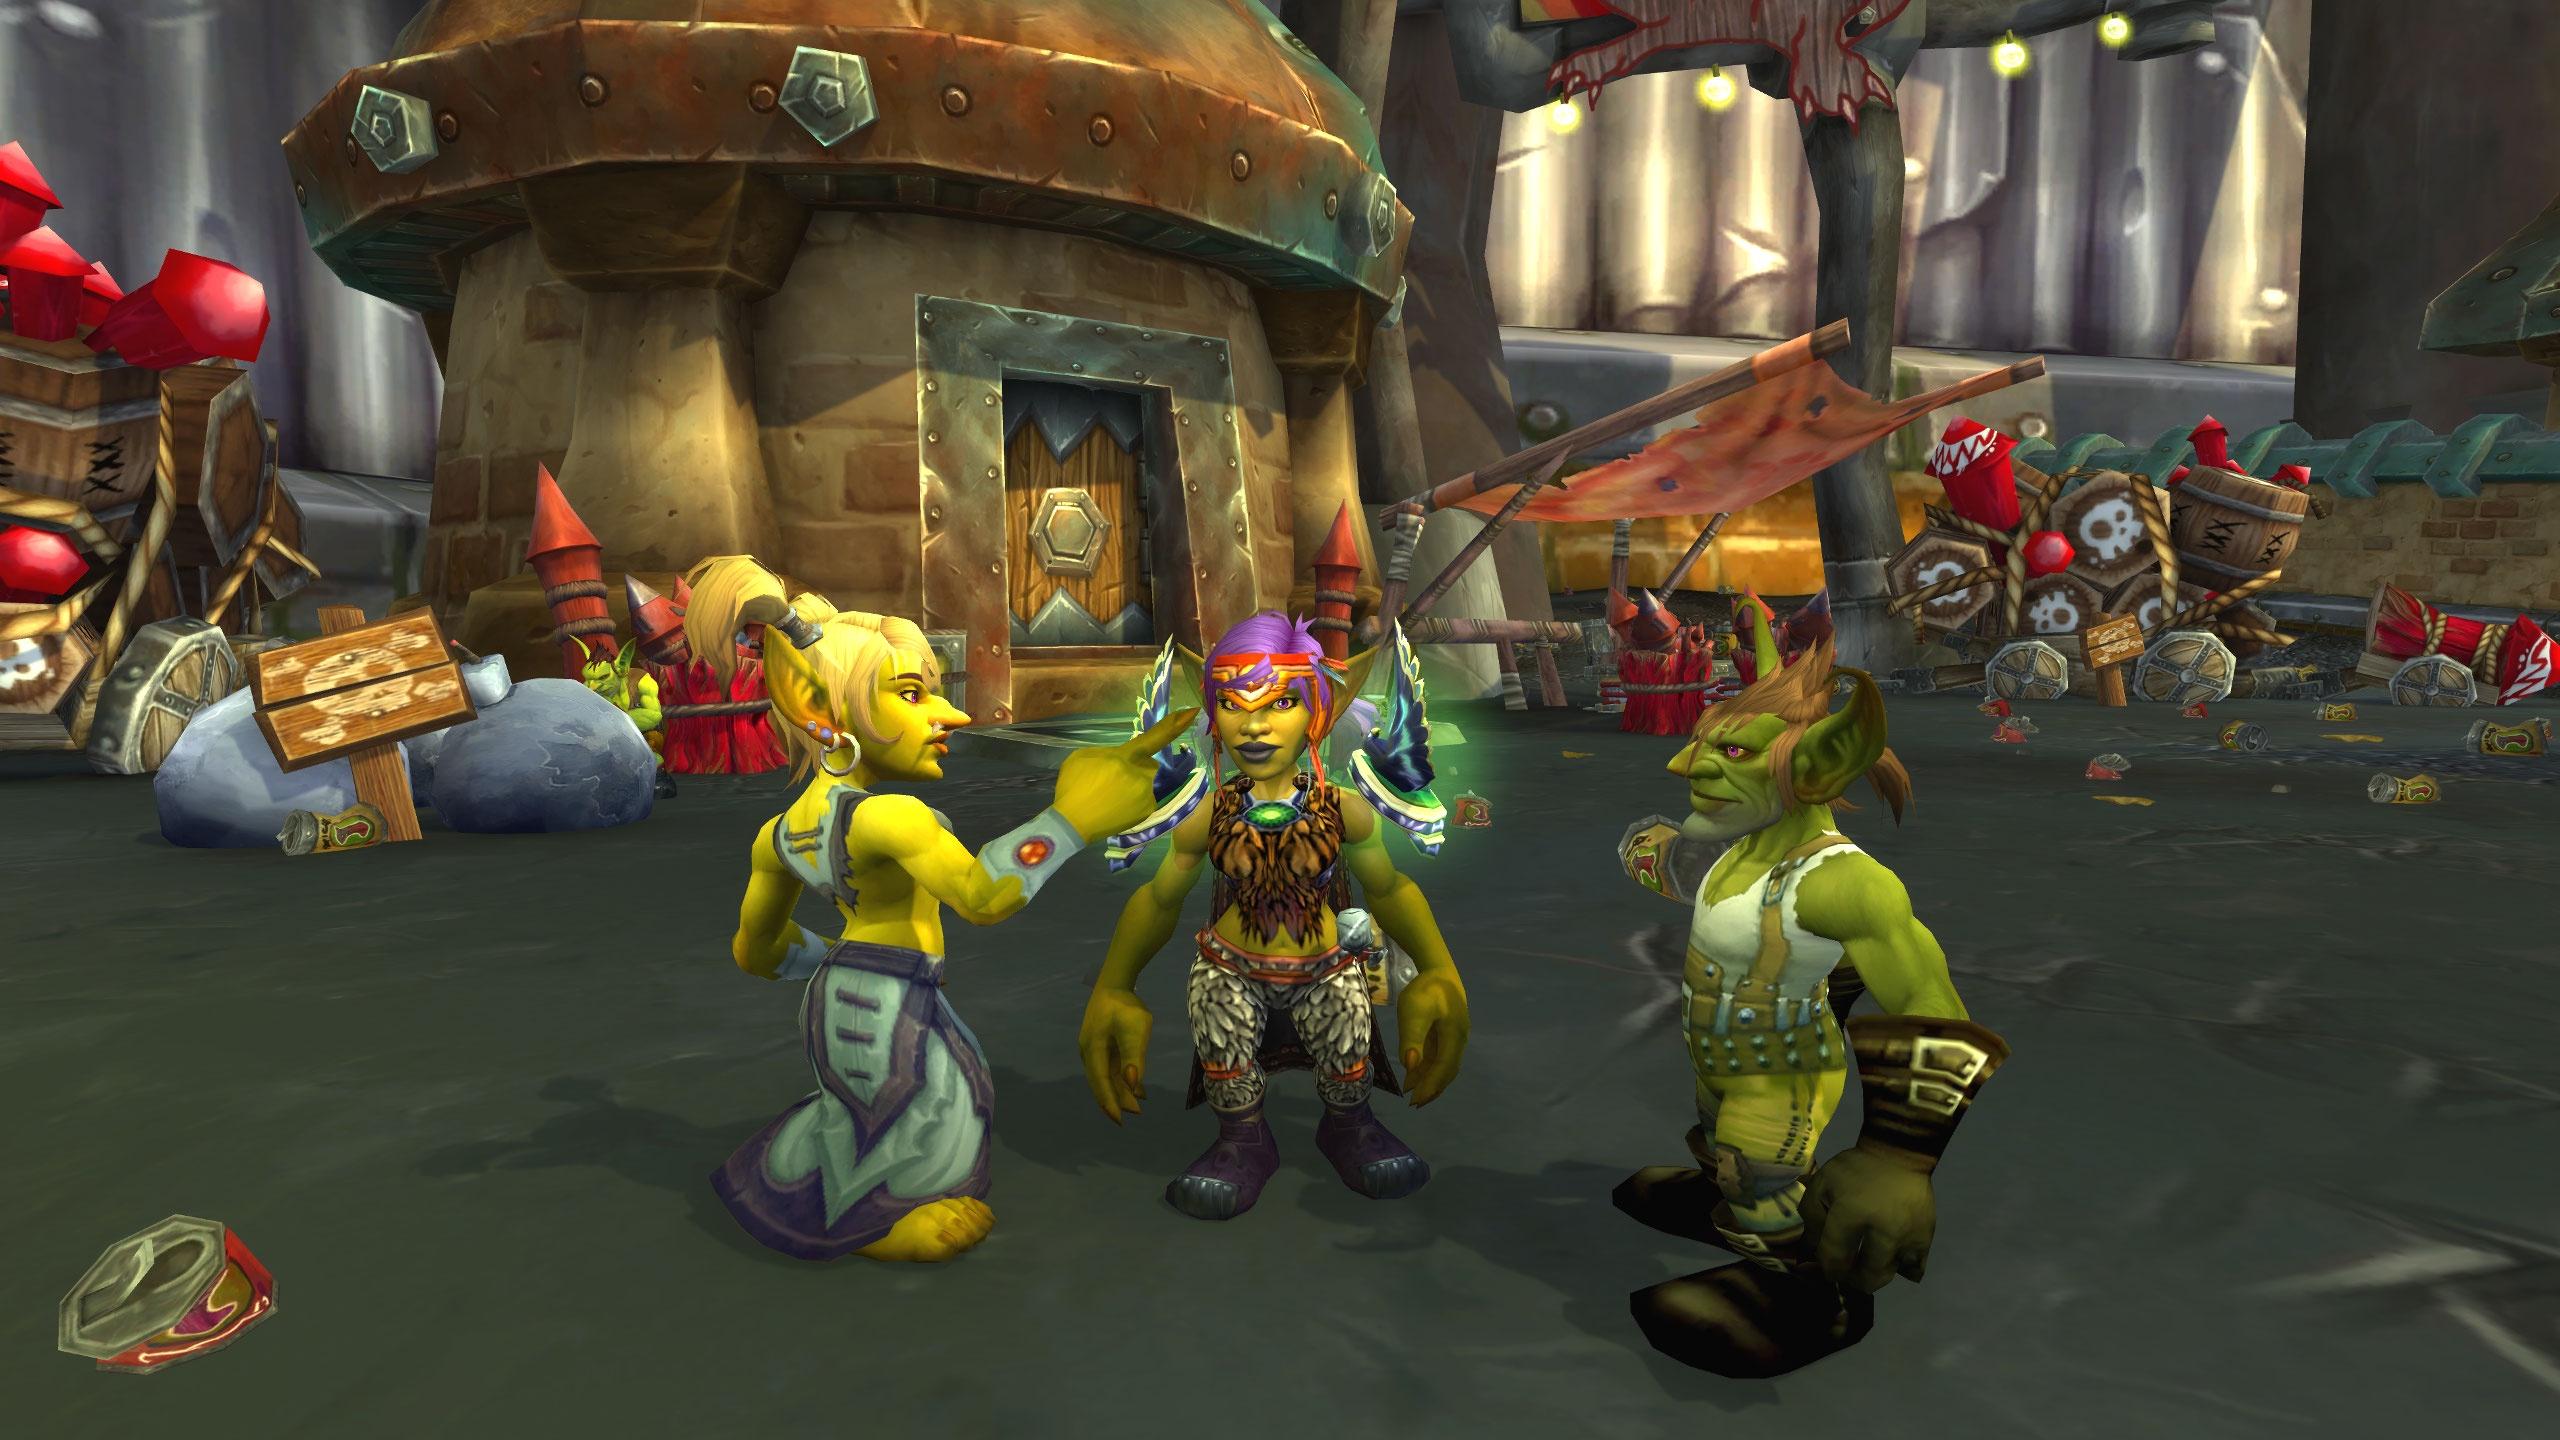 Building Your WoW Team: A Step-by-Step Recruit-A-Friend Guide